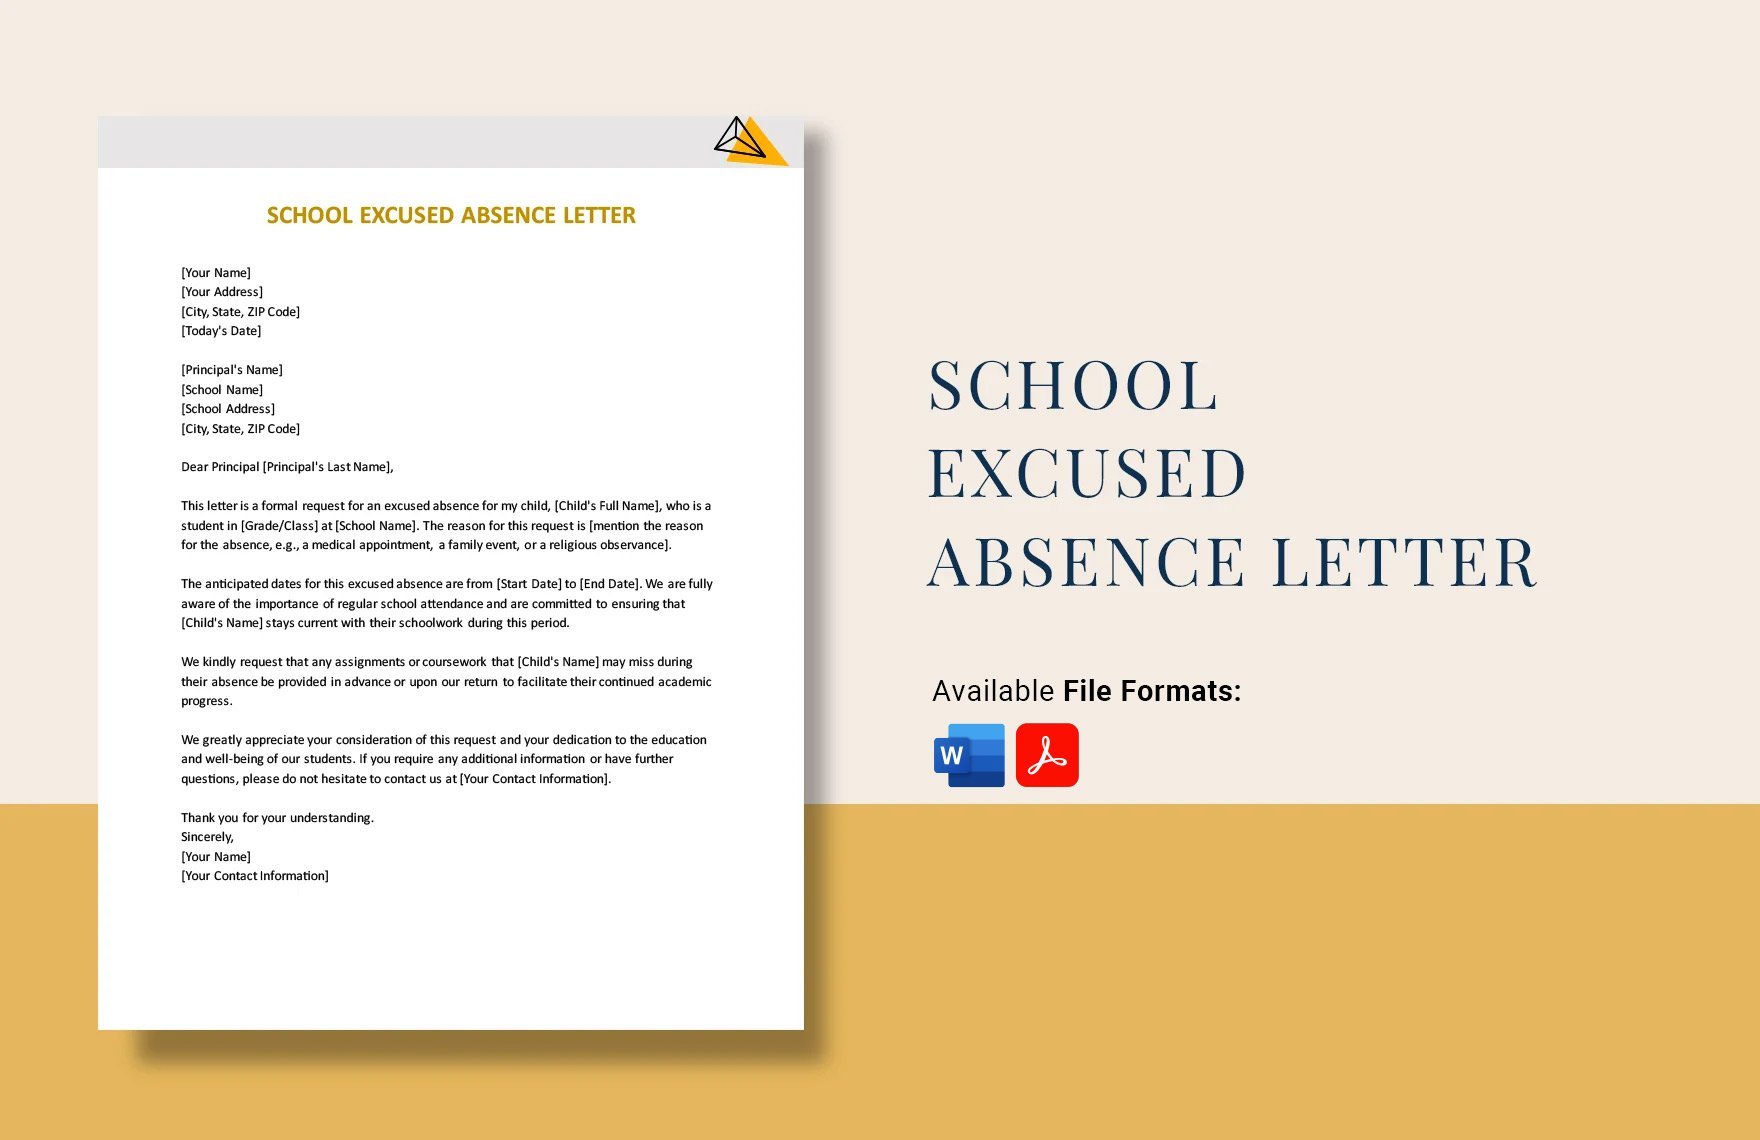 School Excused Absence Letter